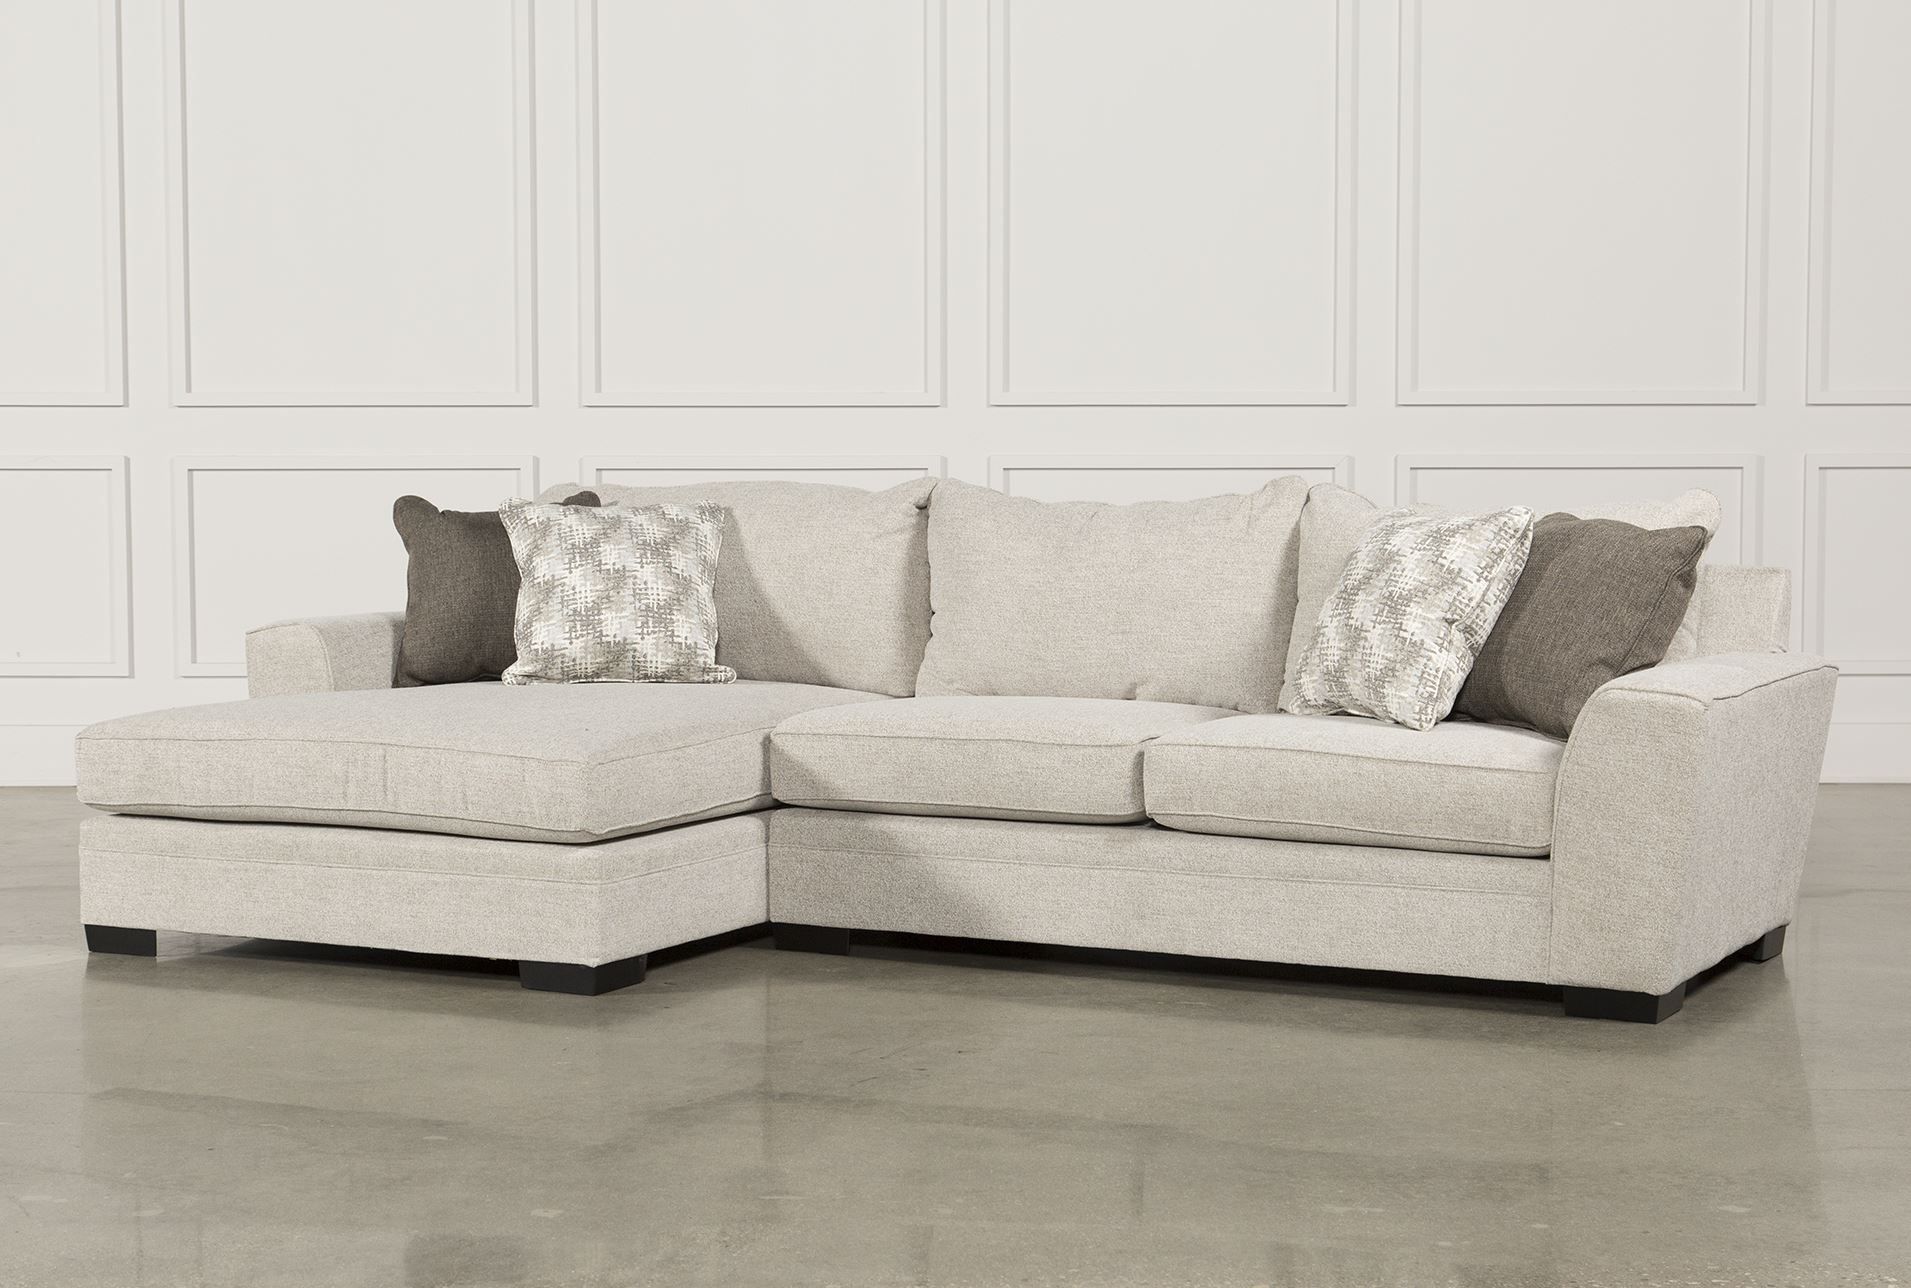 Delano 2 Piece Sectional W/laf Oversized Chaise | Living Room For Delano 2 Piece Sectionals With Laf Oversized Chaise (View 3 of 30)